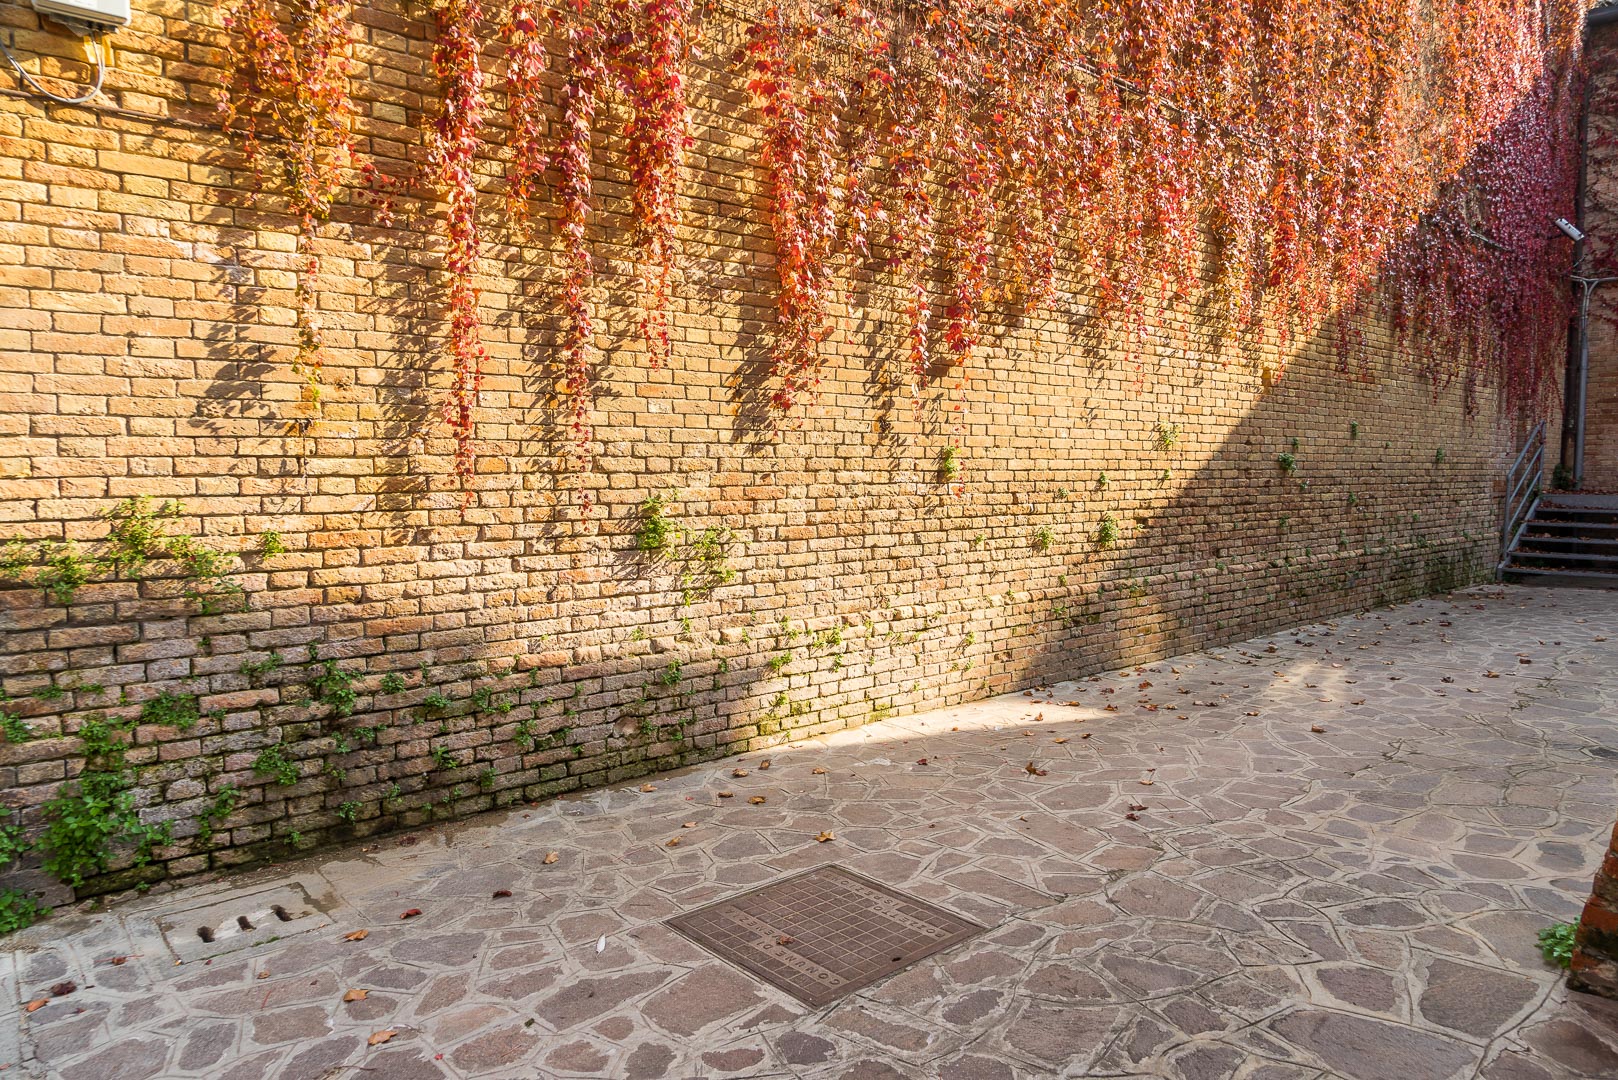 Backplate • ID: 13745 • HDRI Haven - Street With Brick Wall Covered With Leaves